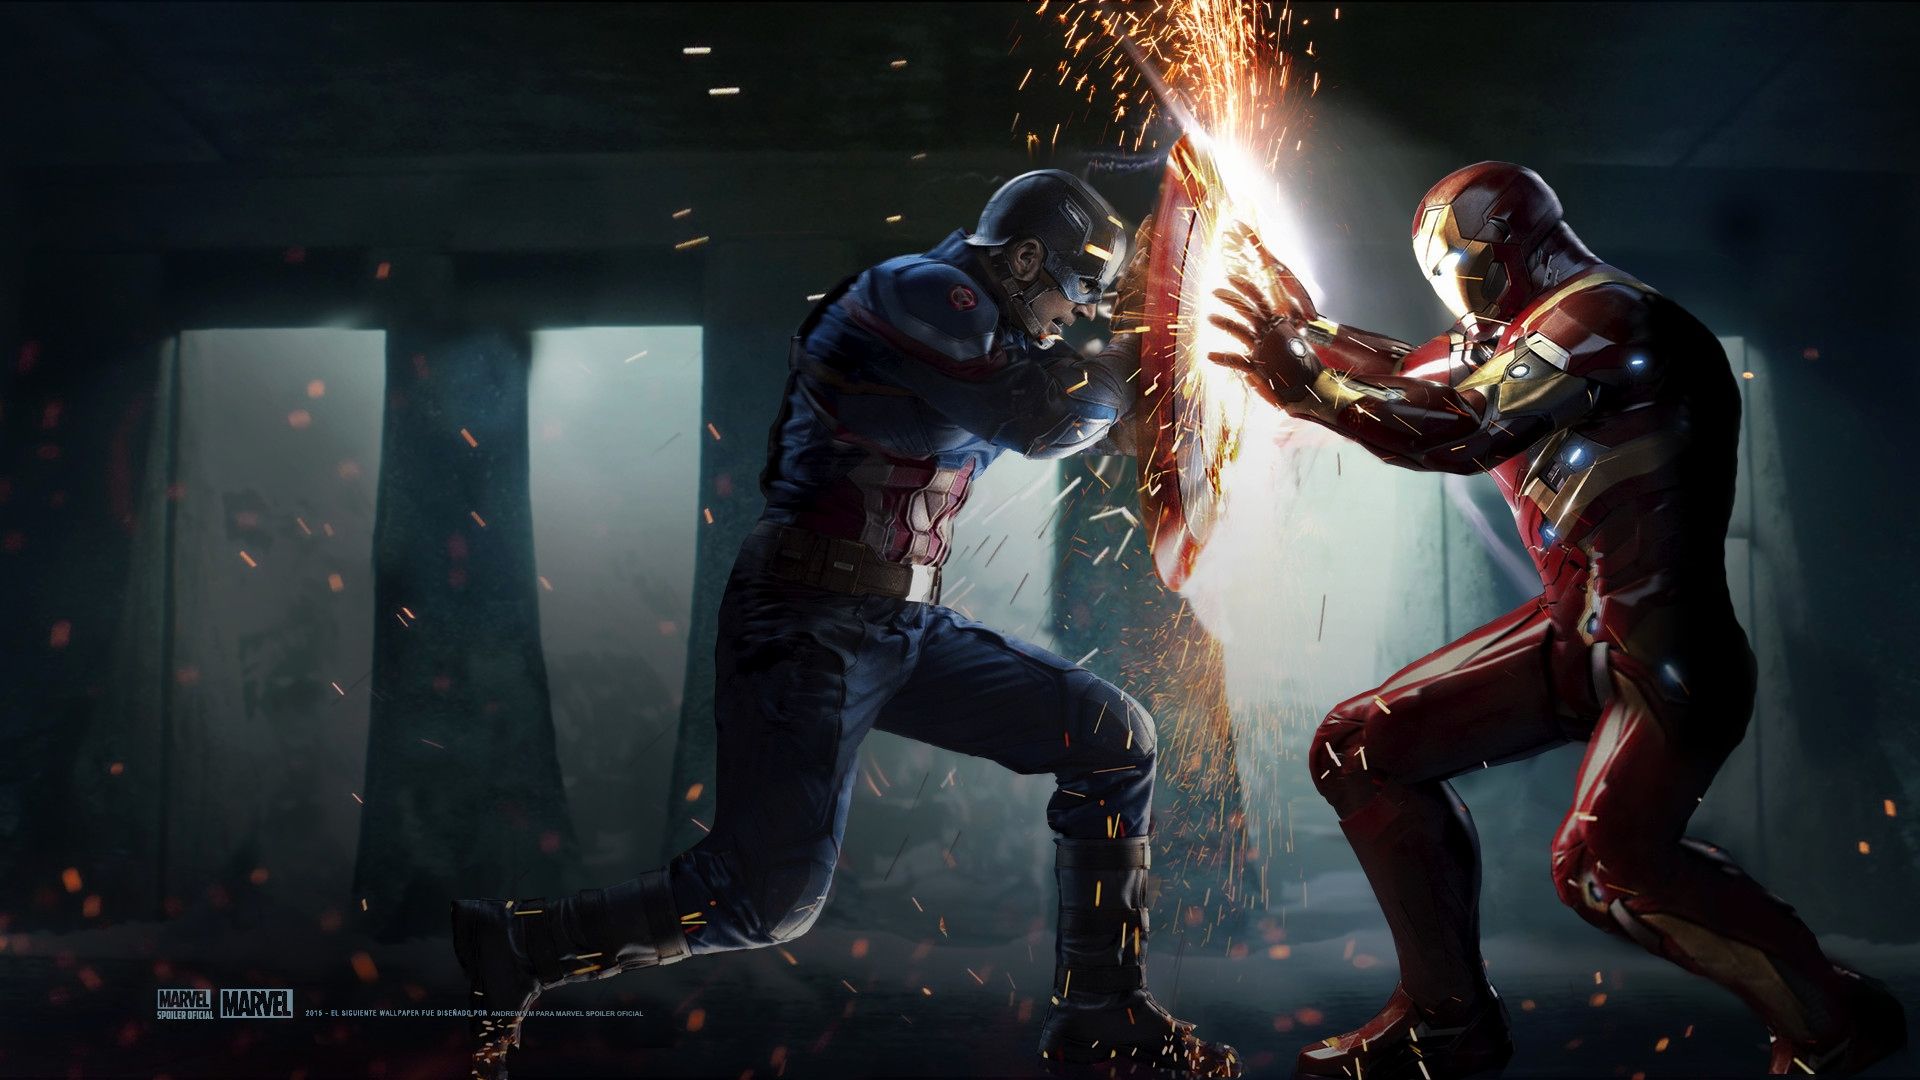 Captain America Civil War Wallpaper Luxury Captain America Civil War Wallpaper High Resolution and Quality Download Of the Day of The Hudson